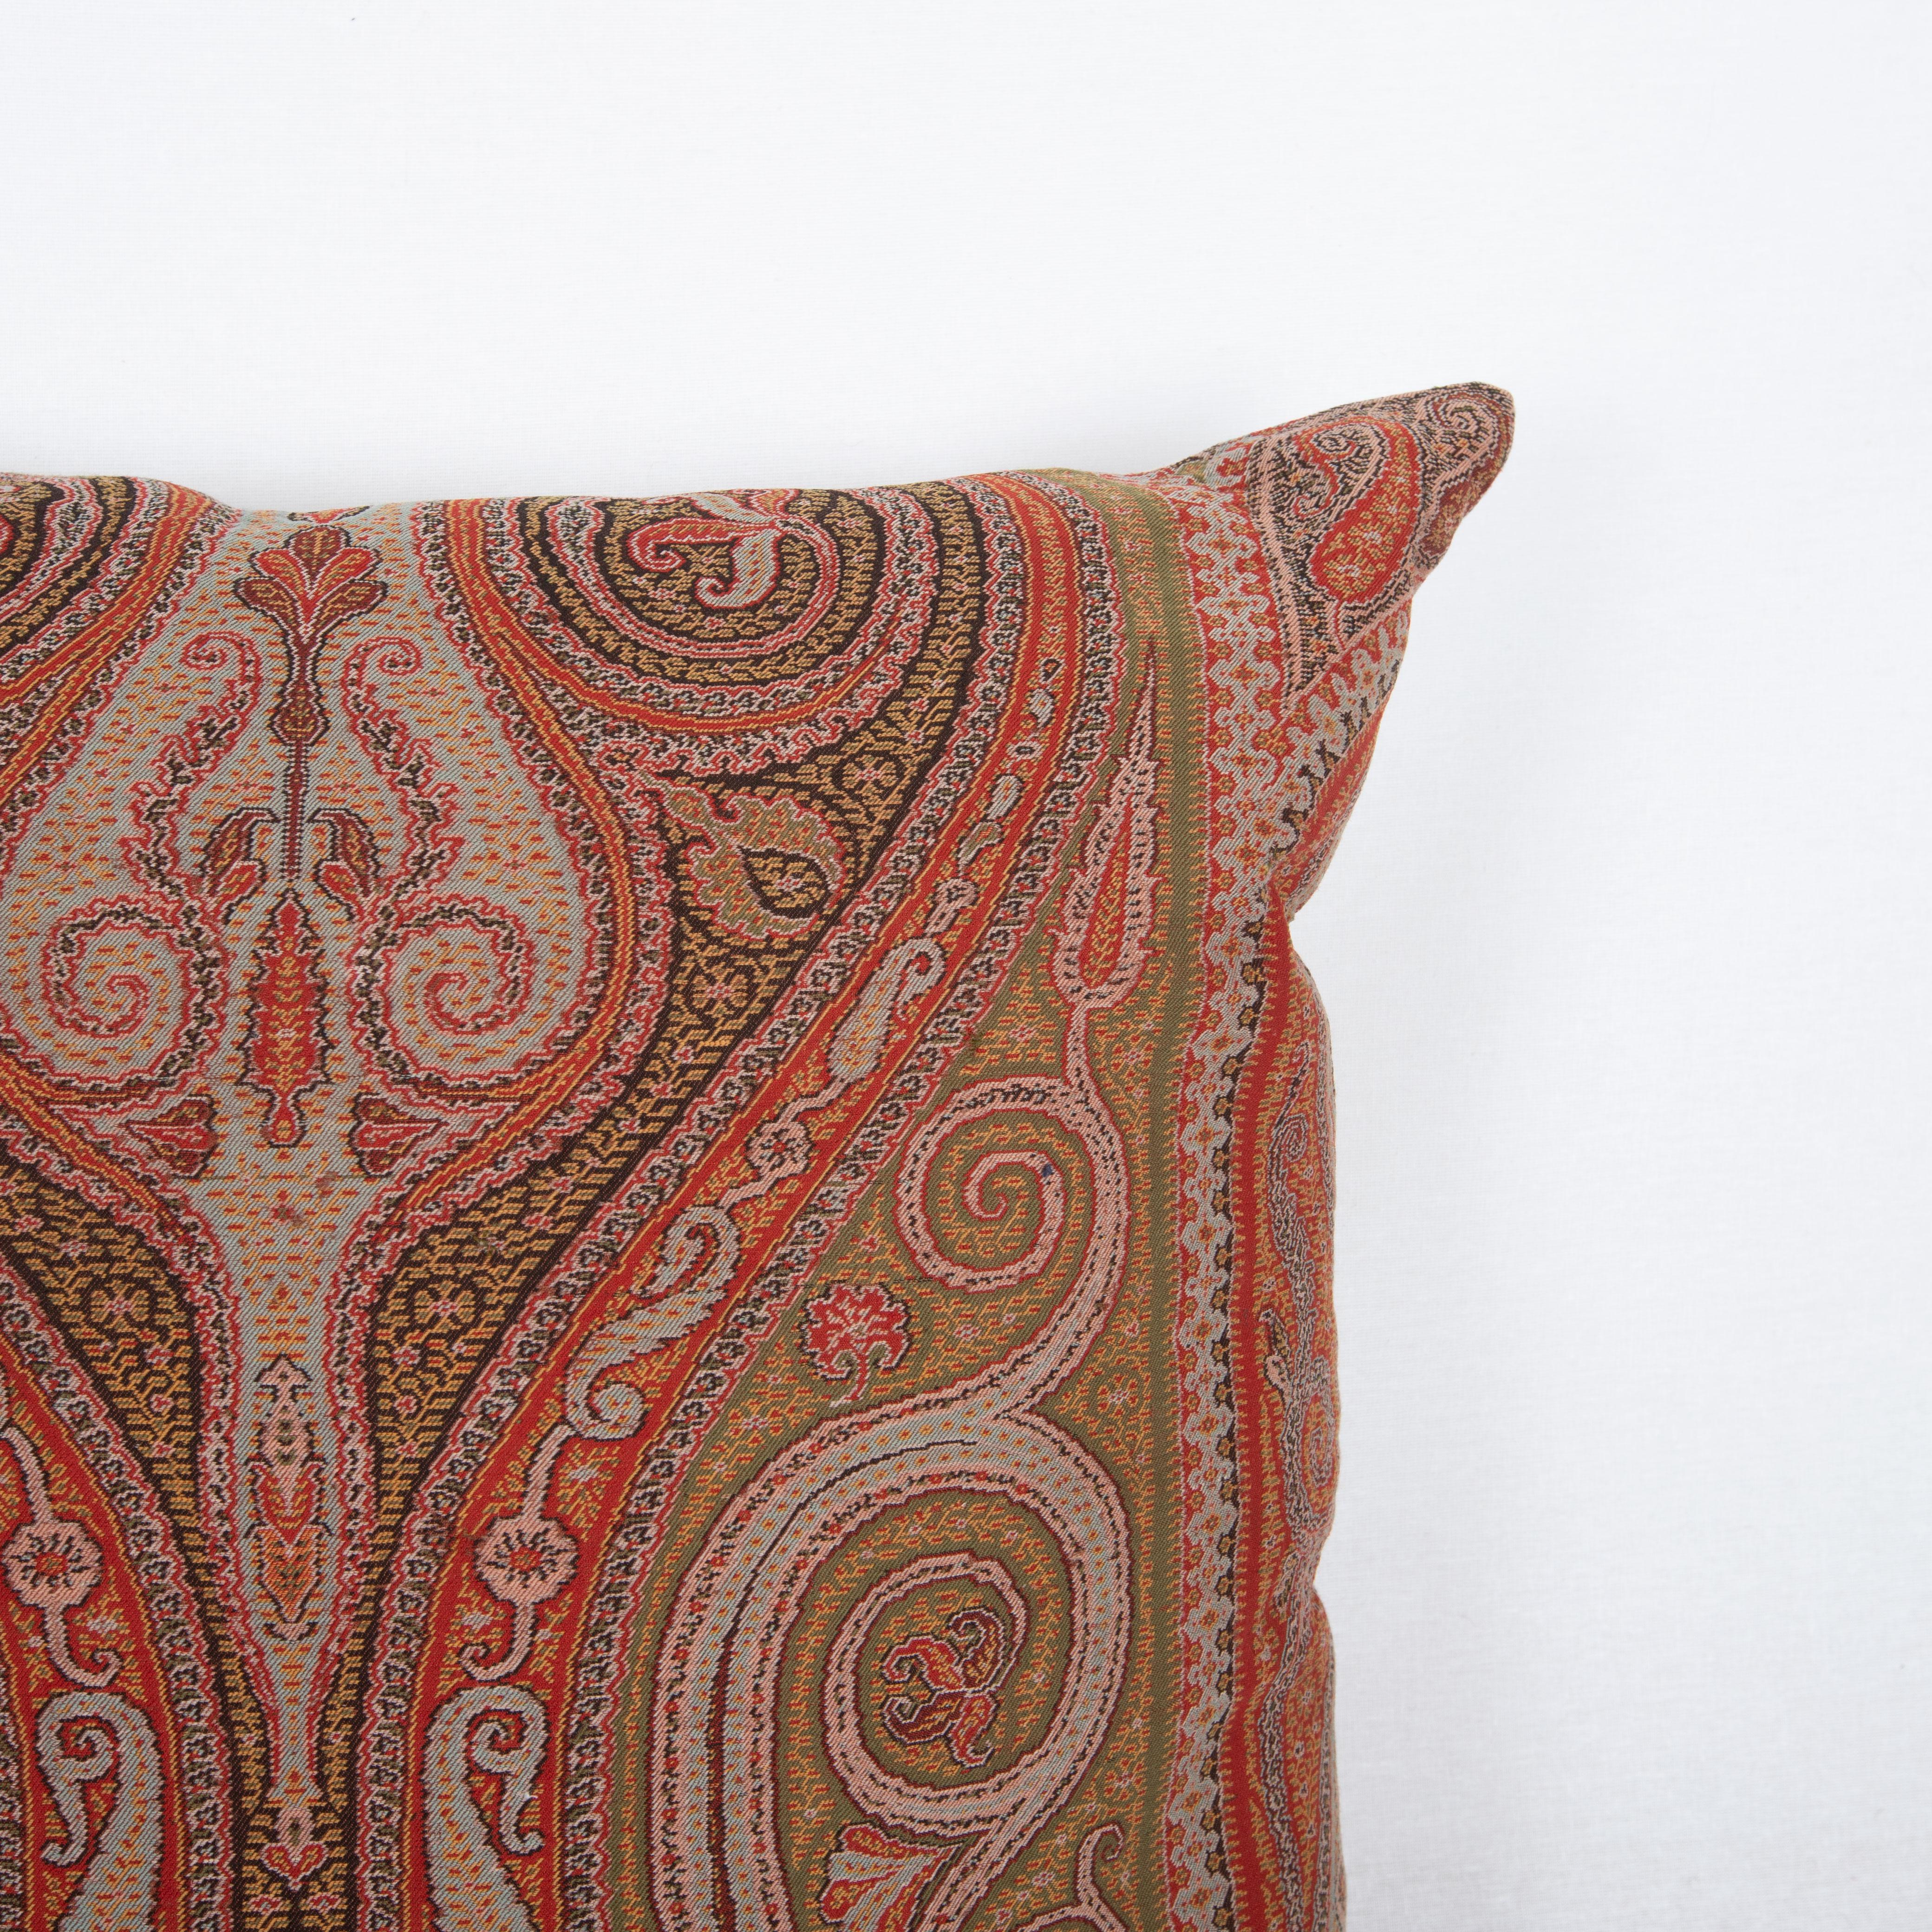 Woven Antique Pillow Cover made from a European Wool Paisley Shawl, L 19th/ E.20th C For Sale